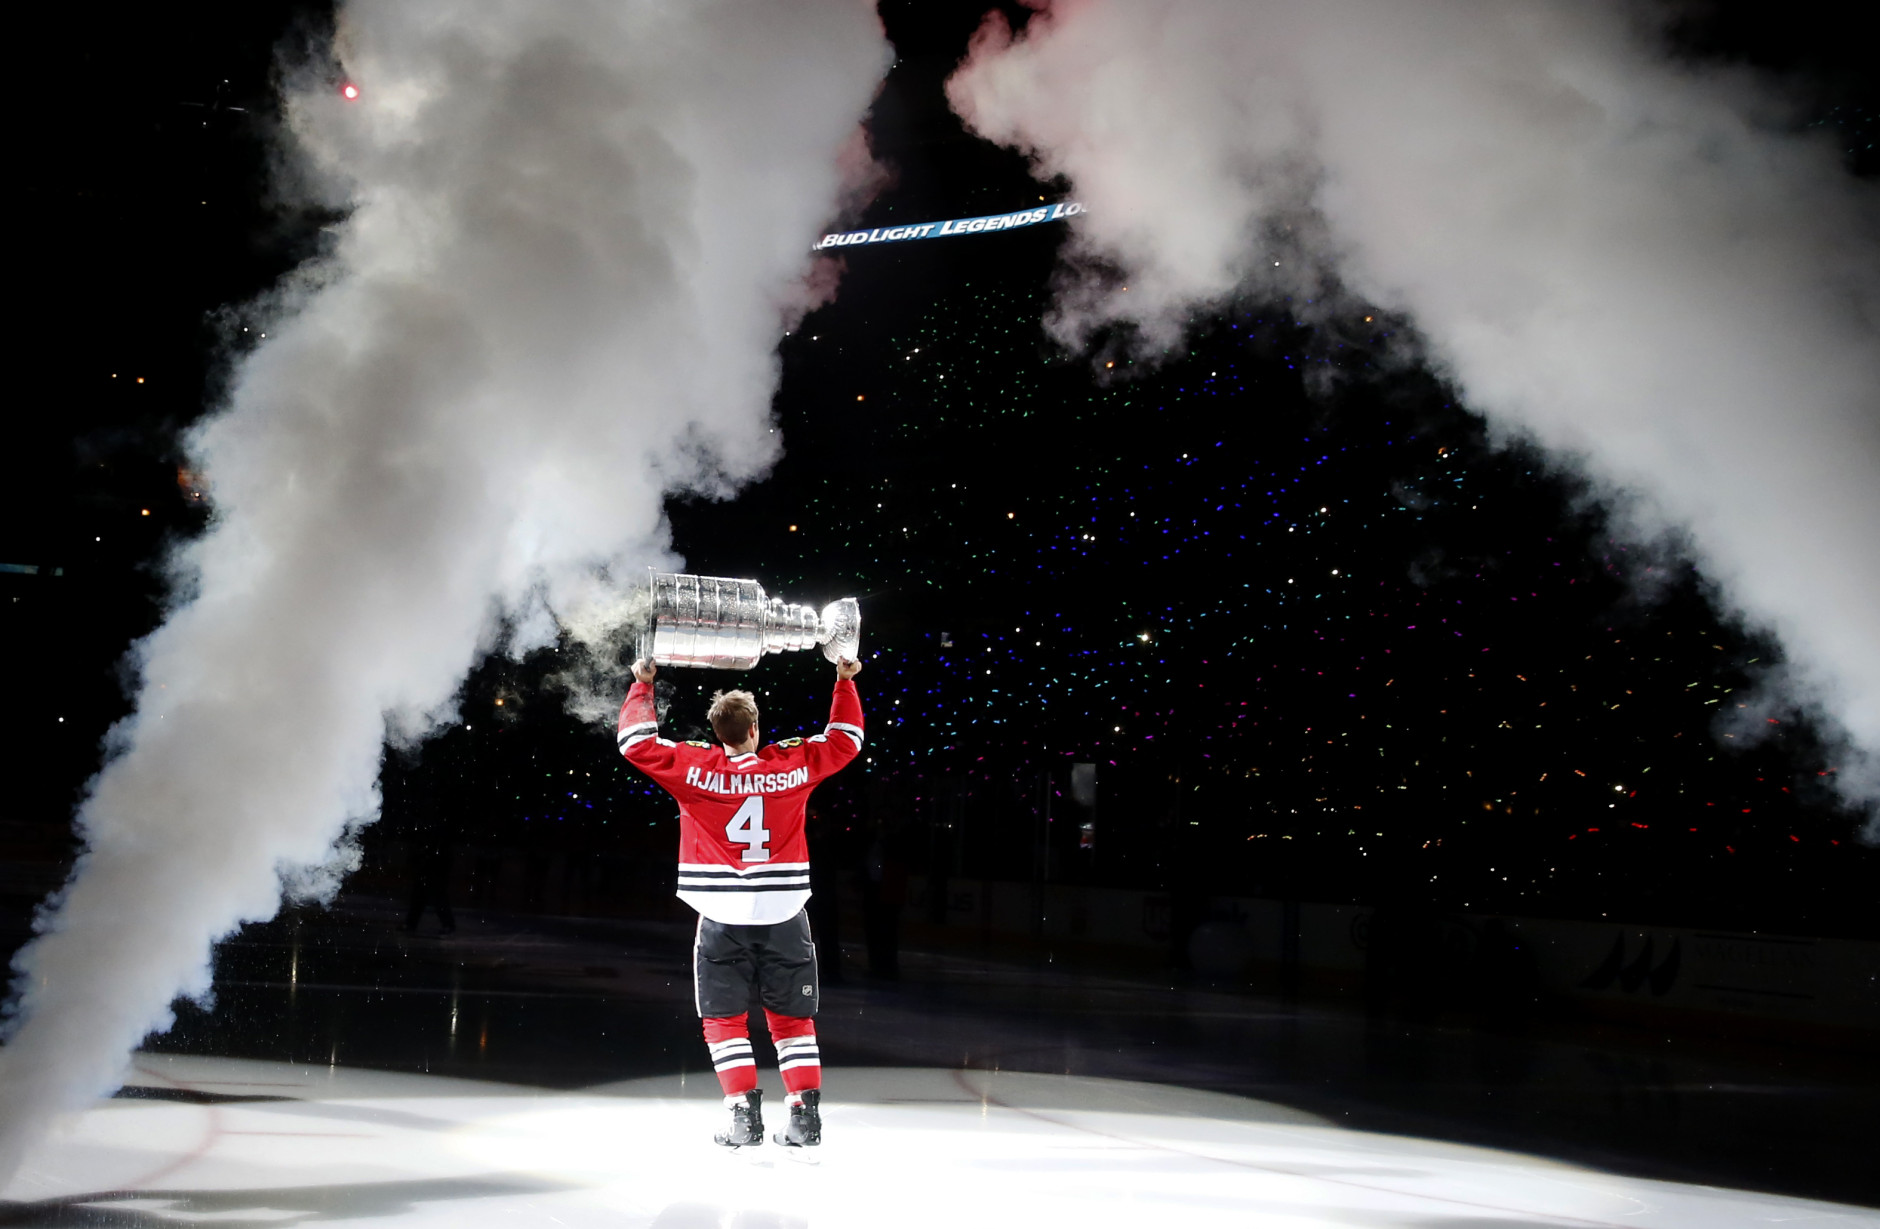 Chicago Blackhawks' Niklas Hjalmarsson skates out to center ice with the Stanley Cup during the championship banner raising ceremony before an NHL hockey game between the Blackhawks and the New York Rangers, Wednesday, Oct. 7, 2015, in Chicago. (AP Photo/Charles Rex Arbogast)